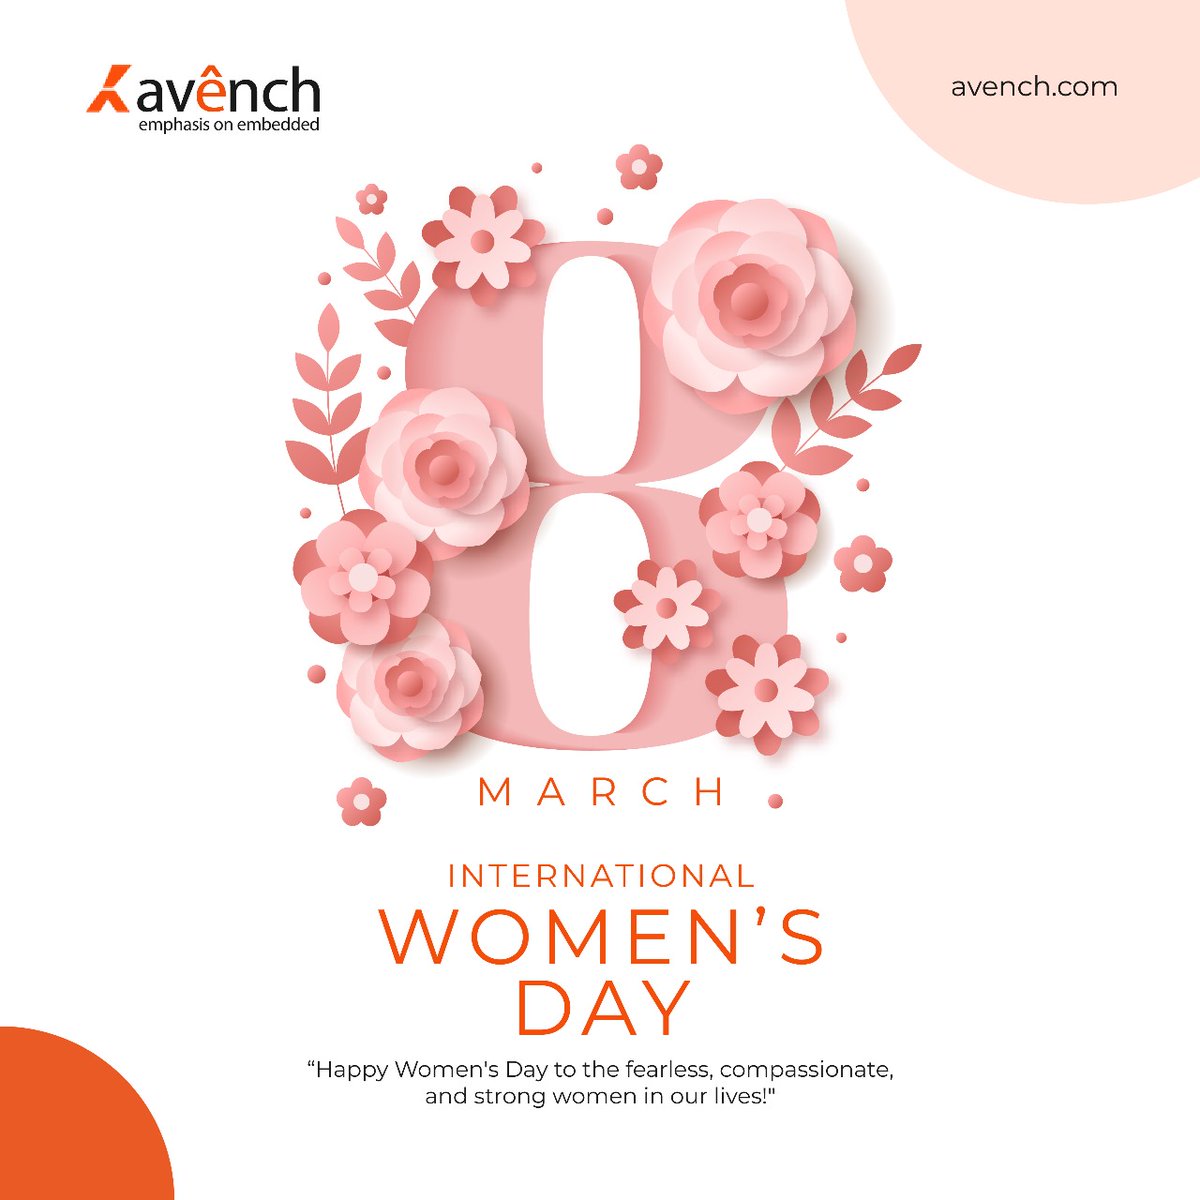 Avench celebrates International Women's Day, honoring the strong and compassionate women who inspire us all. avench.com #Avench #WomensDay #FearlessWomen #WomenInTech #InternationalWomensDay #StrengthAndCompassion #WomenWhoLead #HappyWomensDay2024